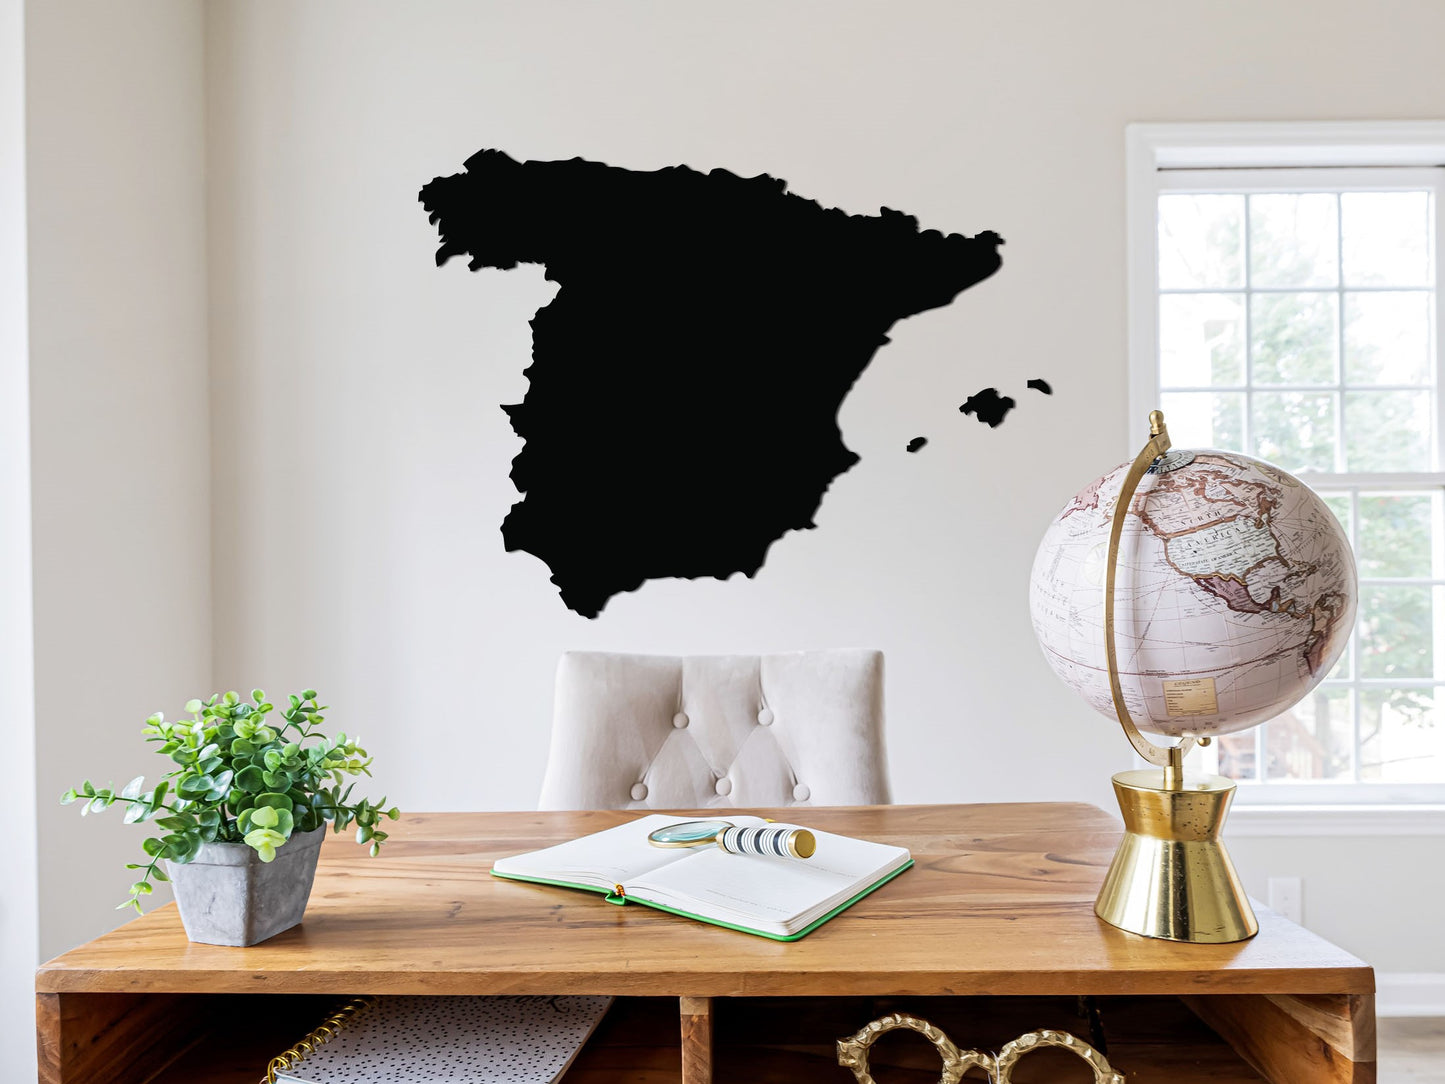 Wooden map - Spain